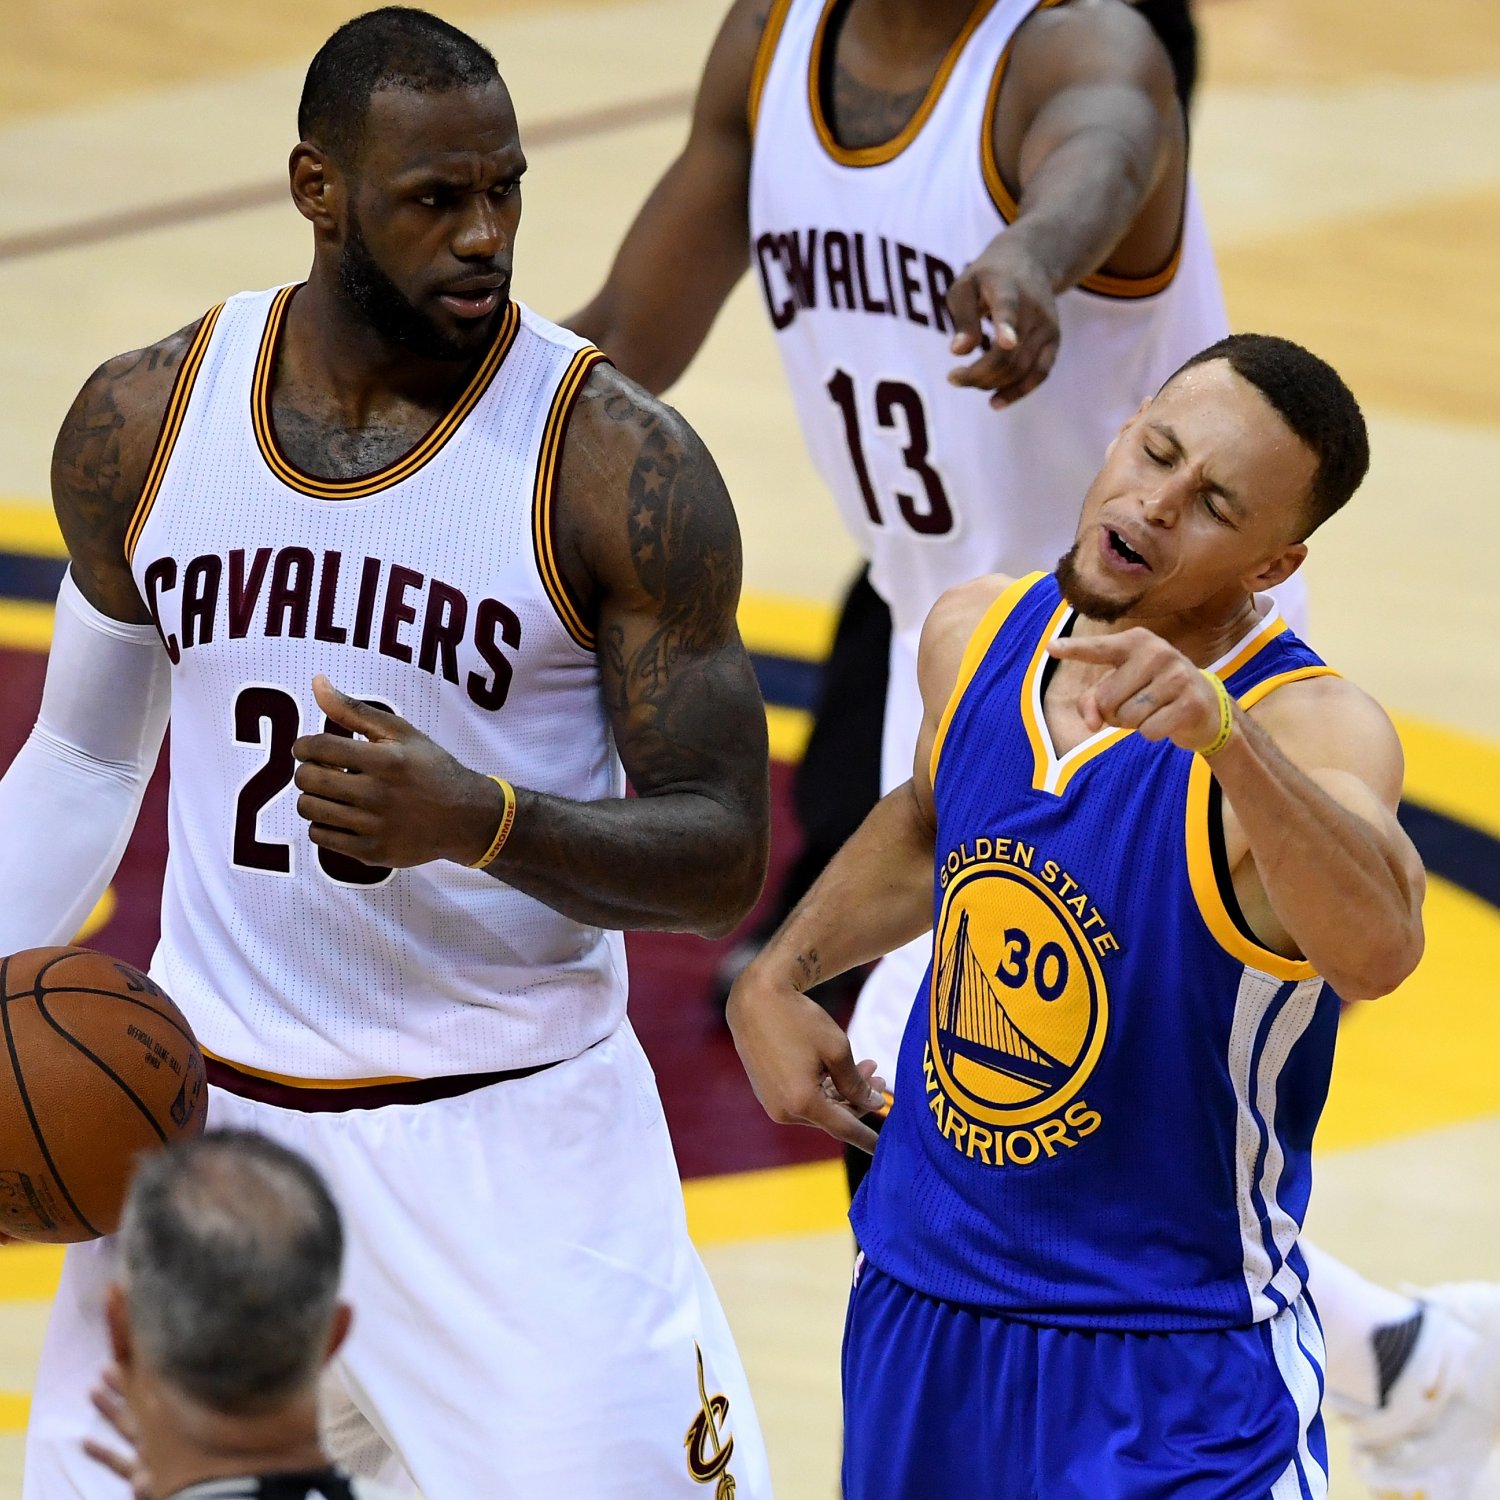  Throwing Mouthpiece into Stands in NBA Finals Game 6  Bleacher Report